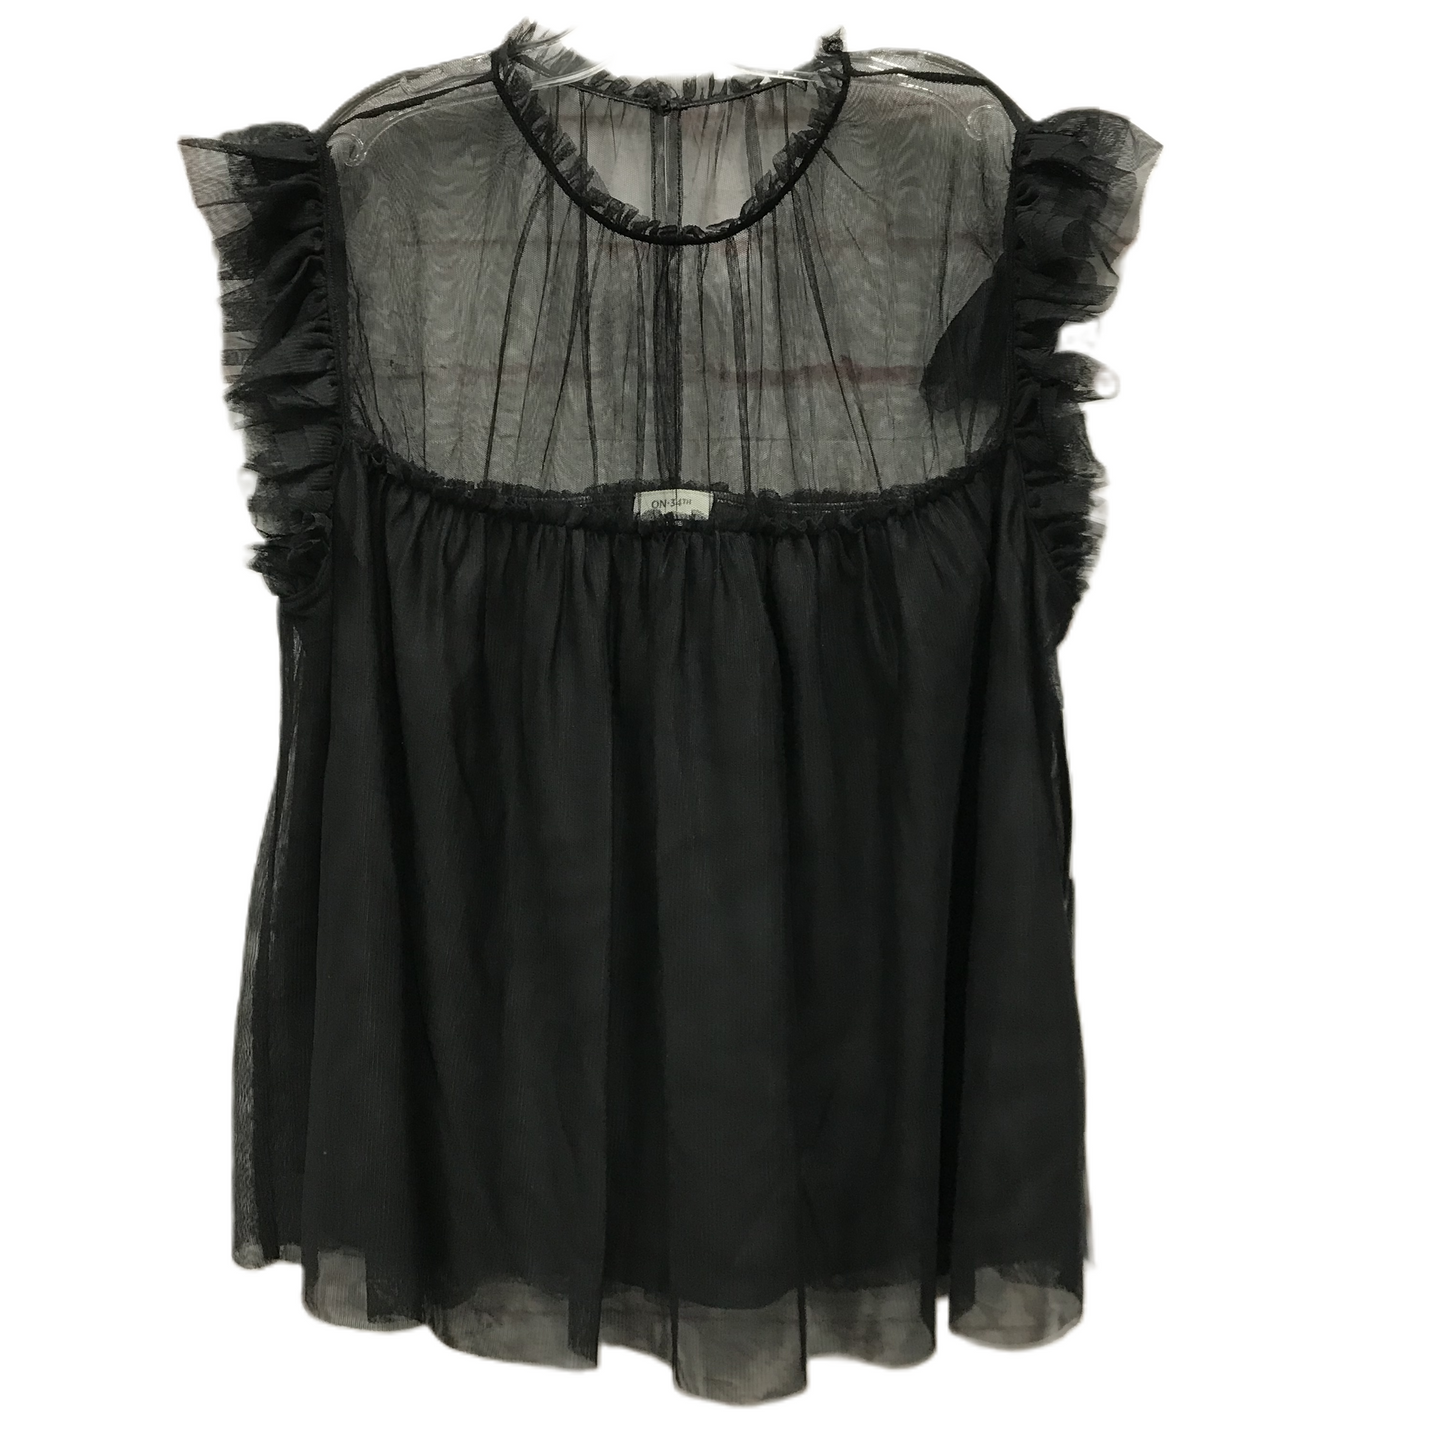 Black Top Short Sleeve By On Schedule, Size: 1x